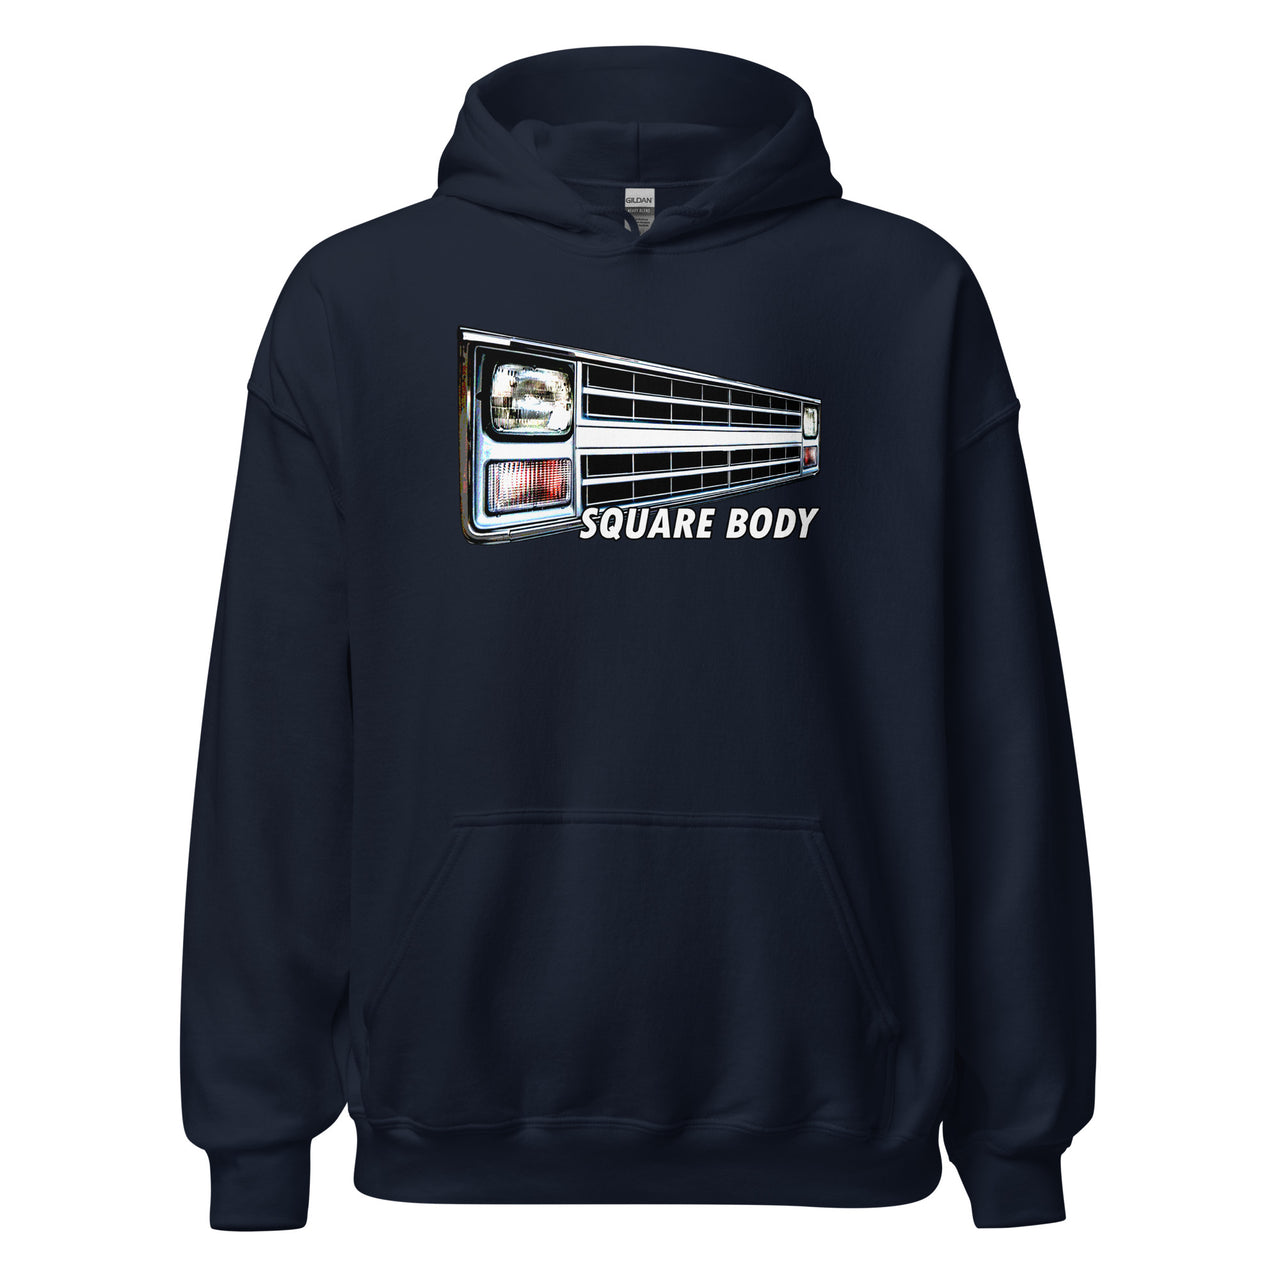 Square Body Truck 80s Angled Grille Hoodie in navy